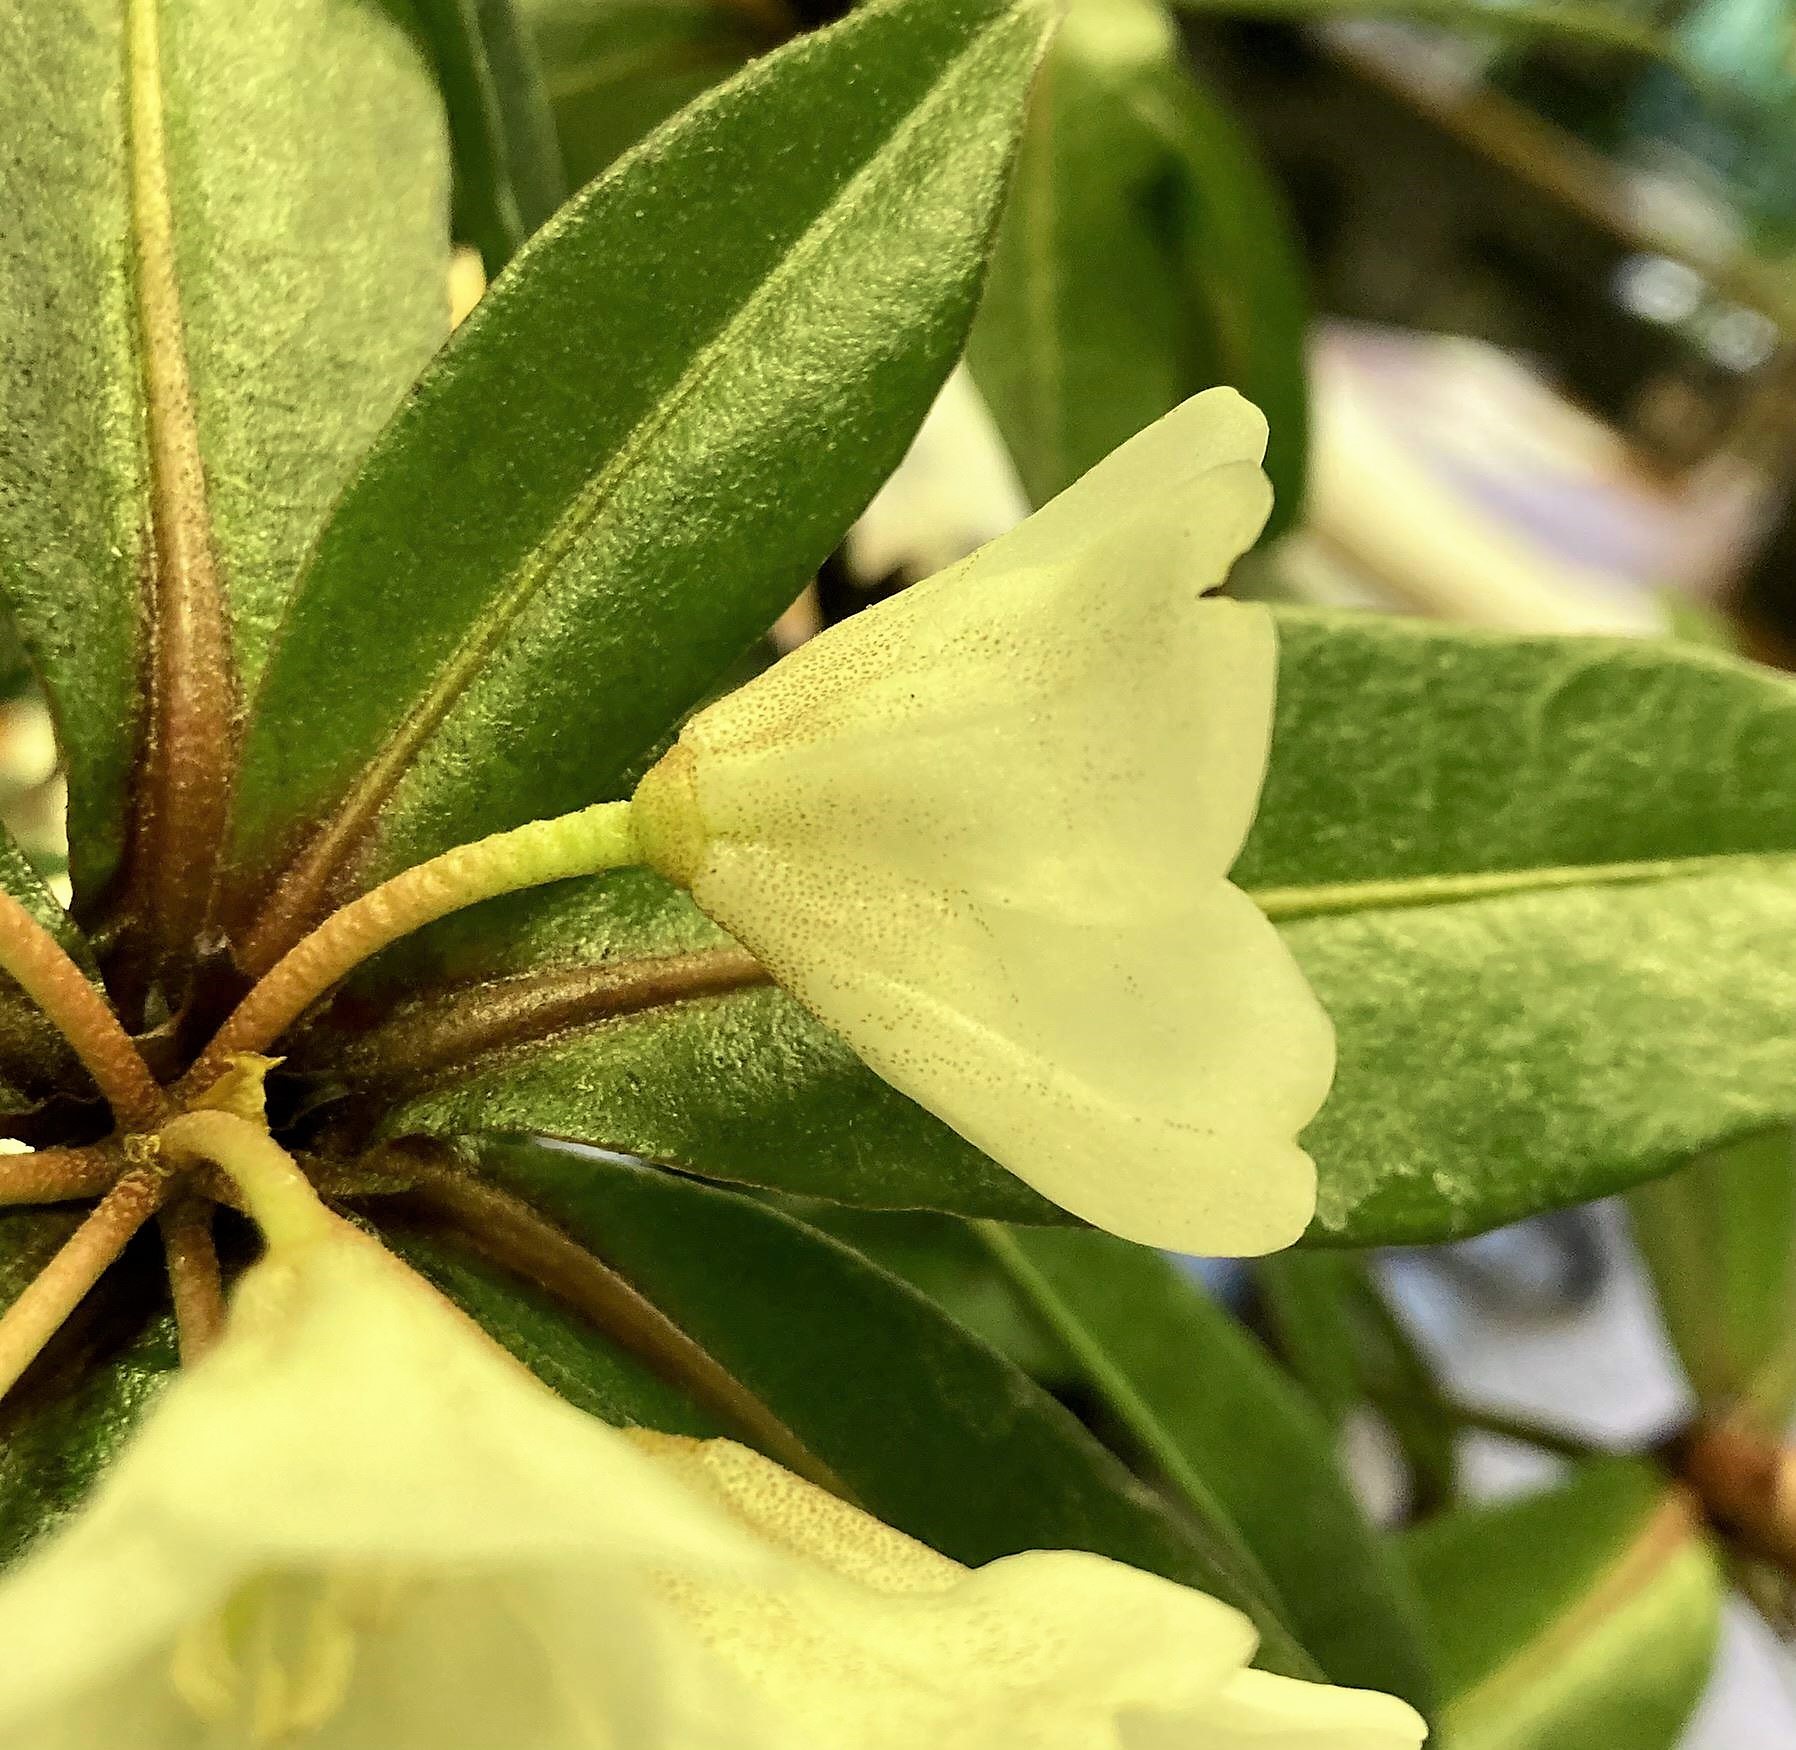 A close up detail of a Rhododendron lanceolatum flower